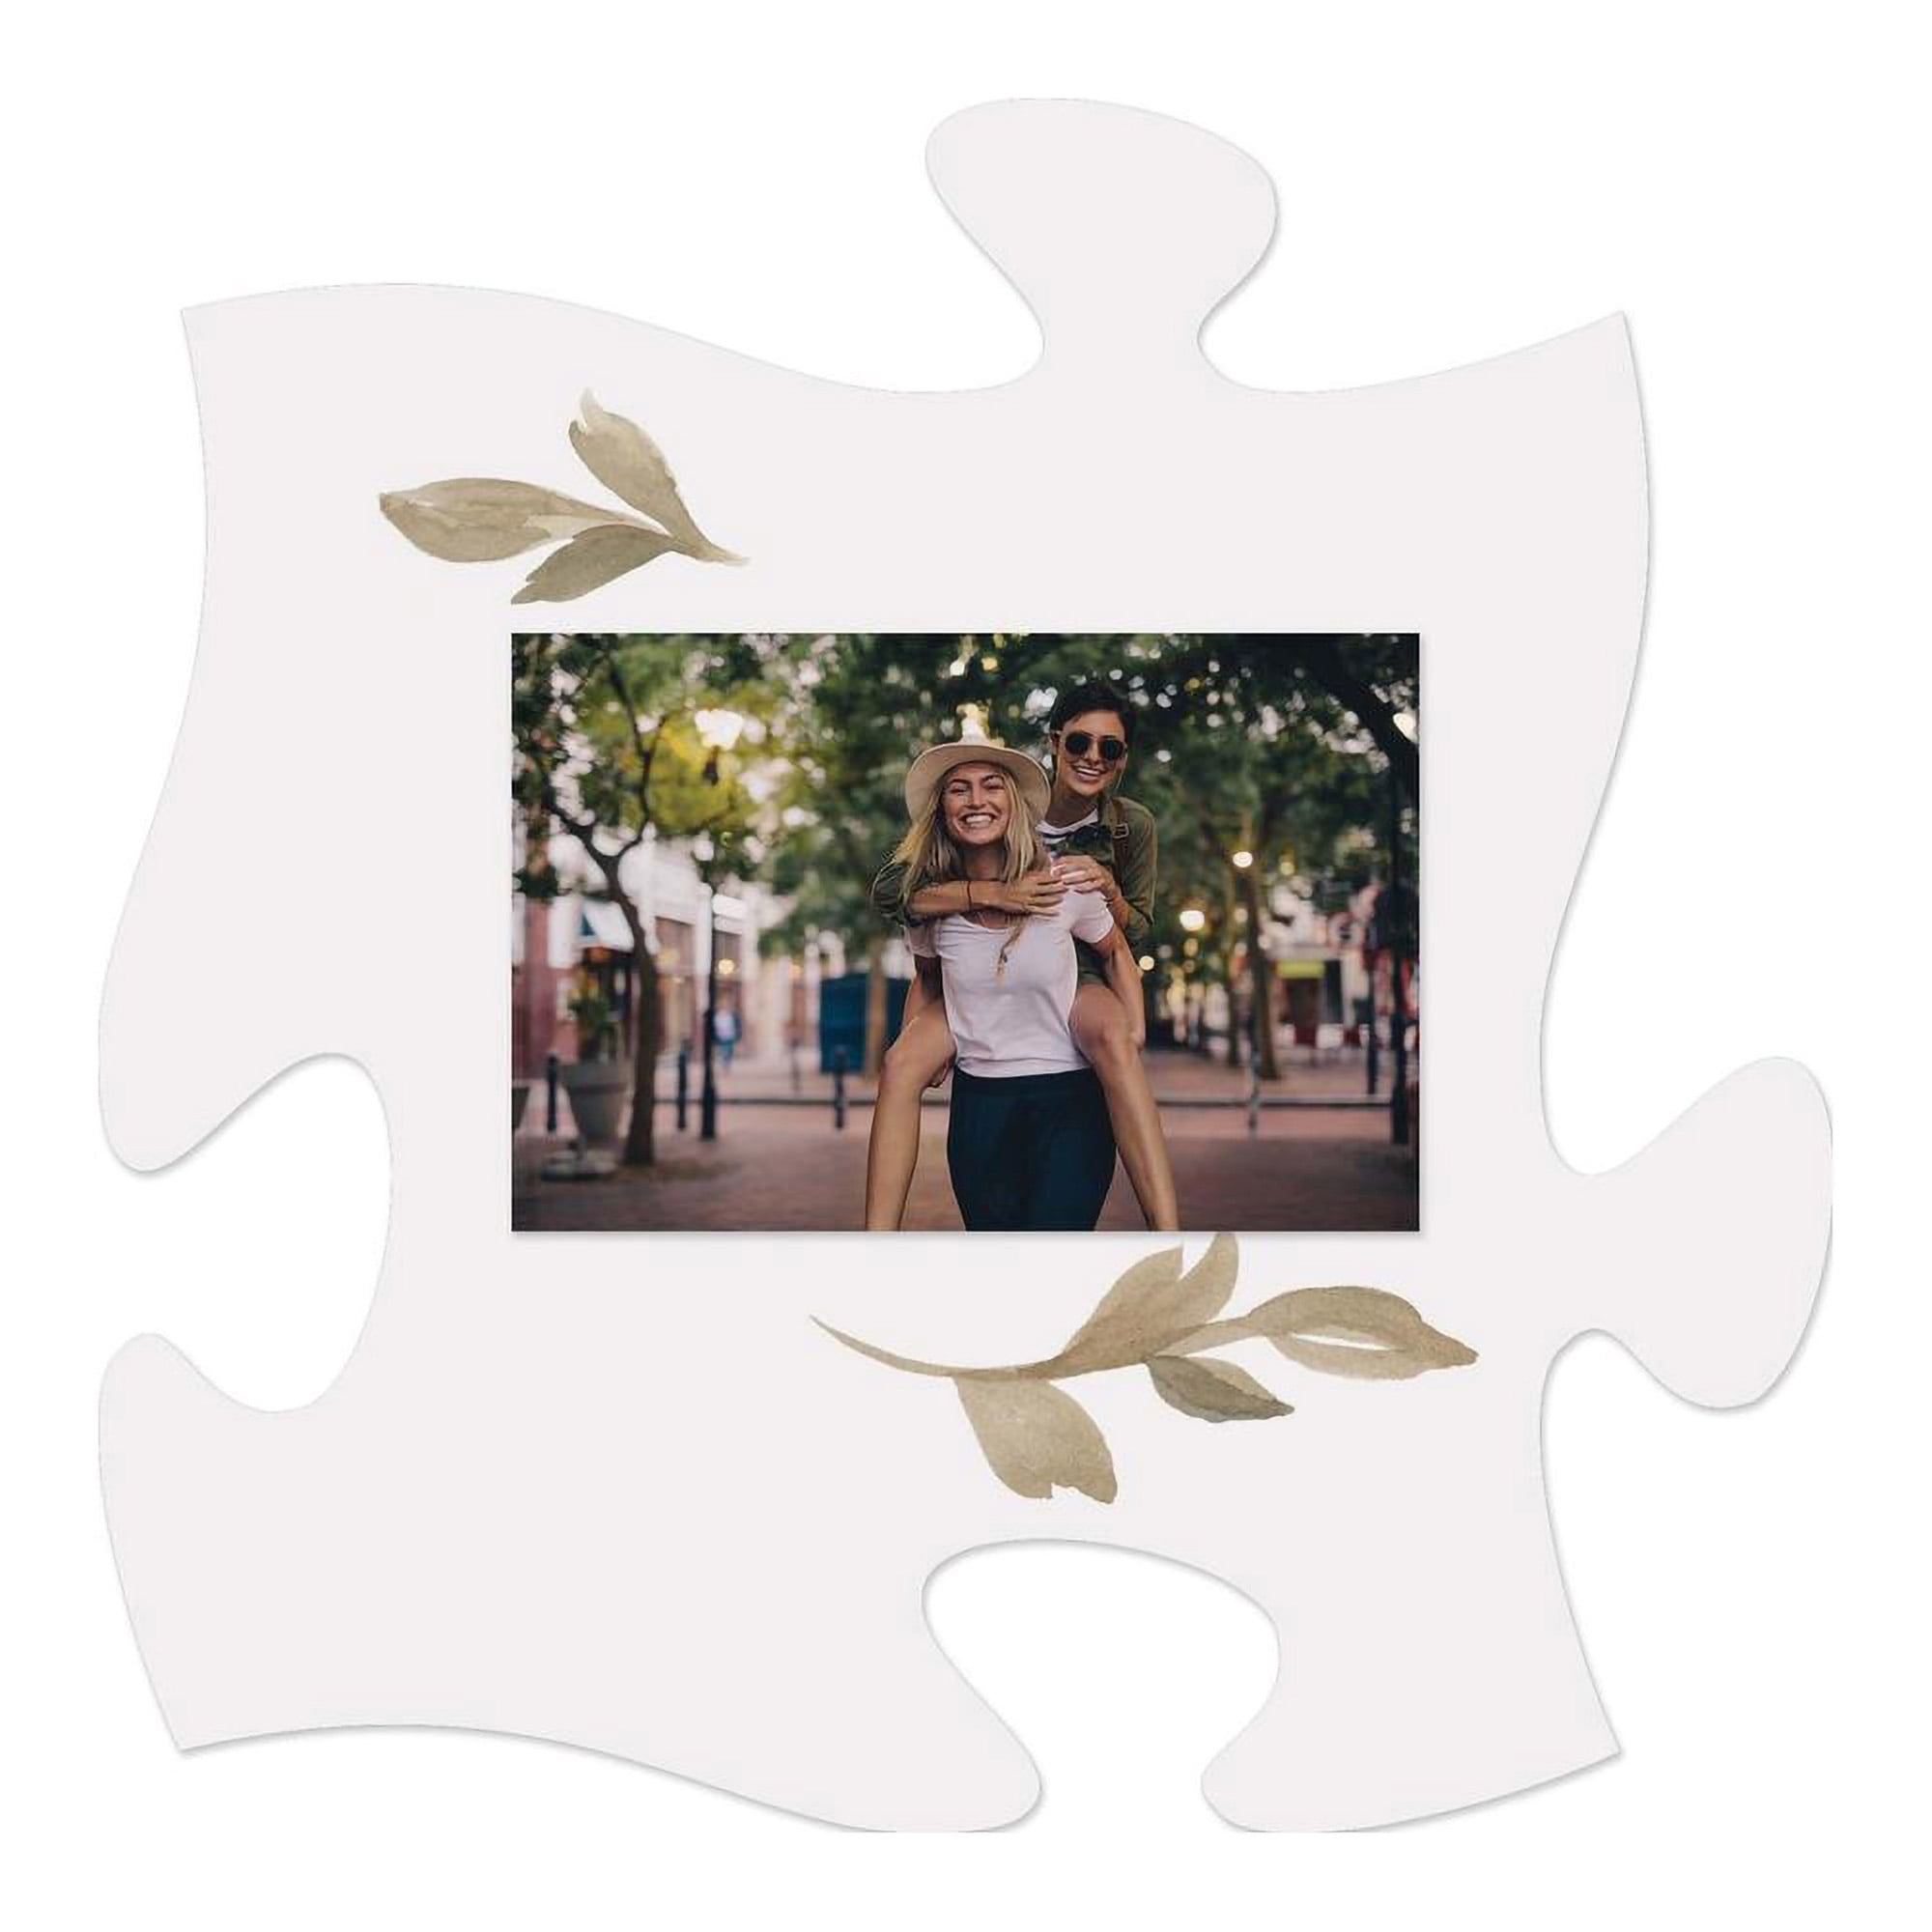 This Is Us Leaf Pattern White 6x6 Wood Mini Puzzle Piece Wall Photo Frame 